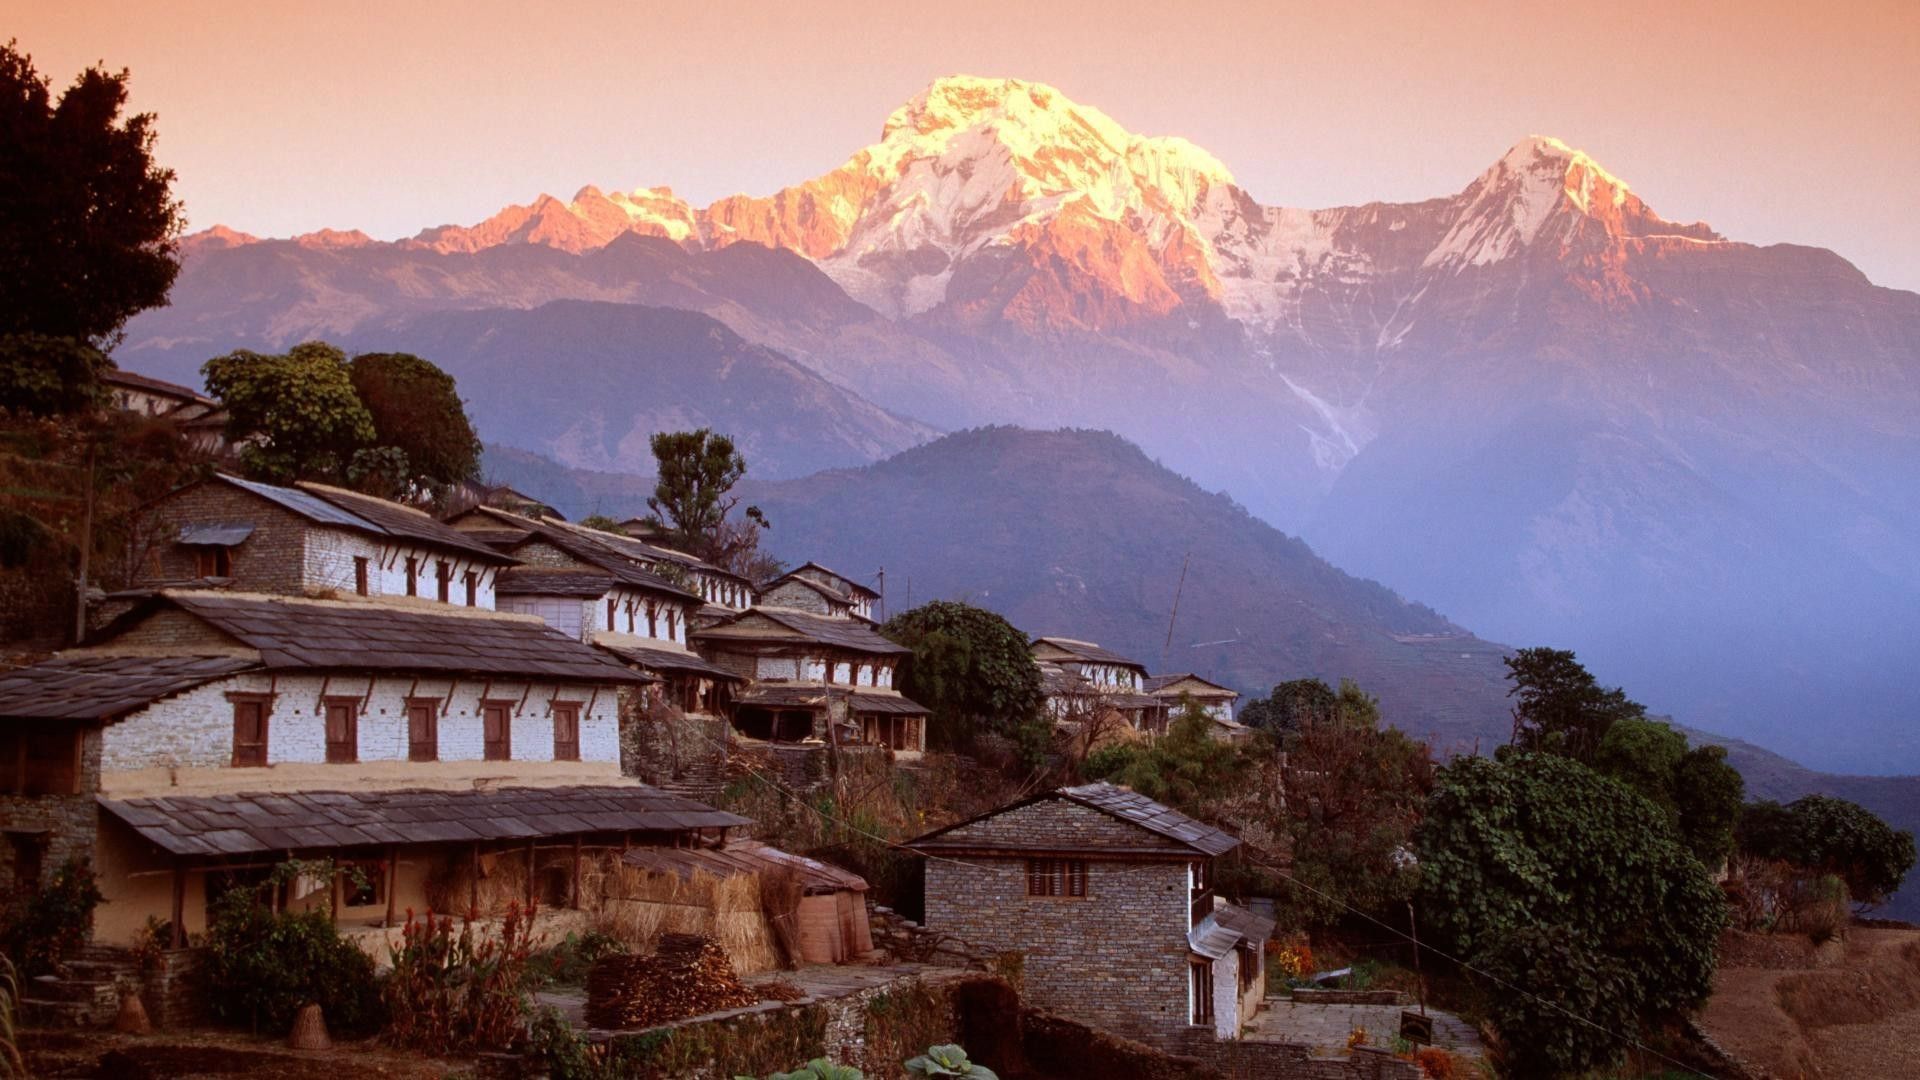 With PayPorter, you can make fast, easy and safe money transfers to Nepal at the most affordable prices!